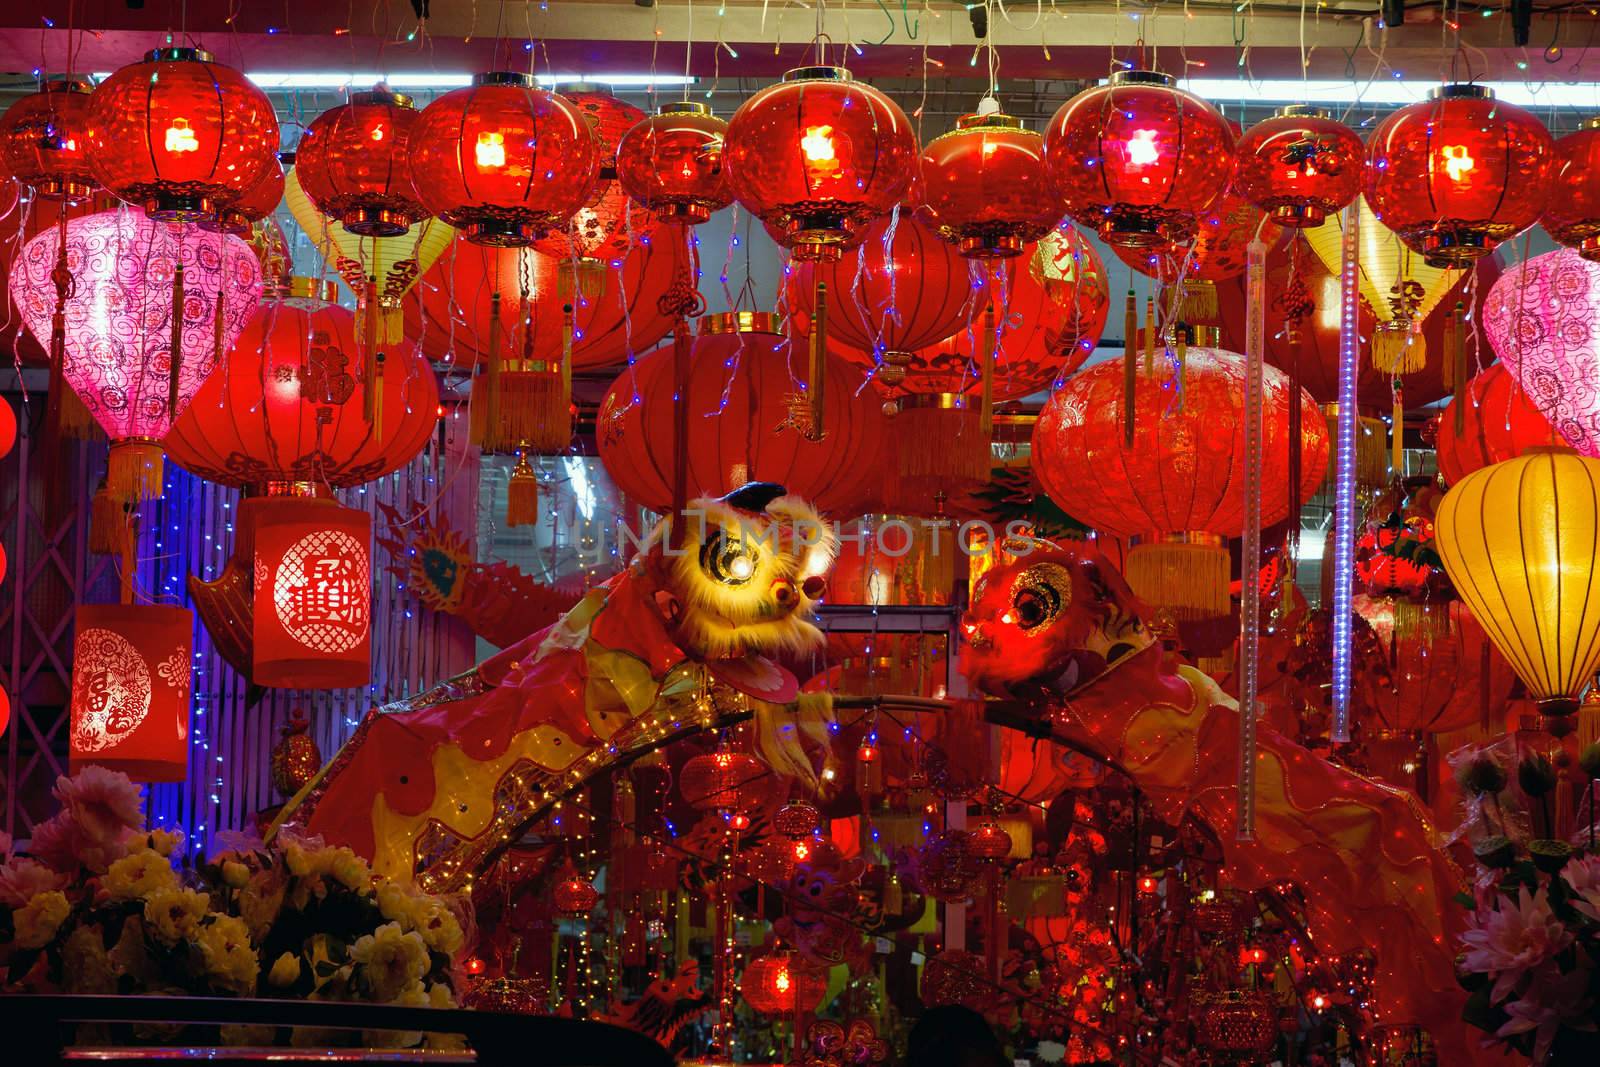 Storefront Displays of Chinese New Year Lanterns and Lion Dance along Street in Chinatown